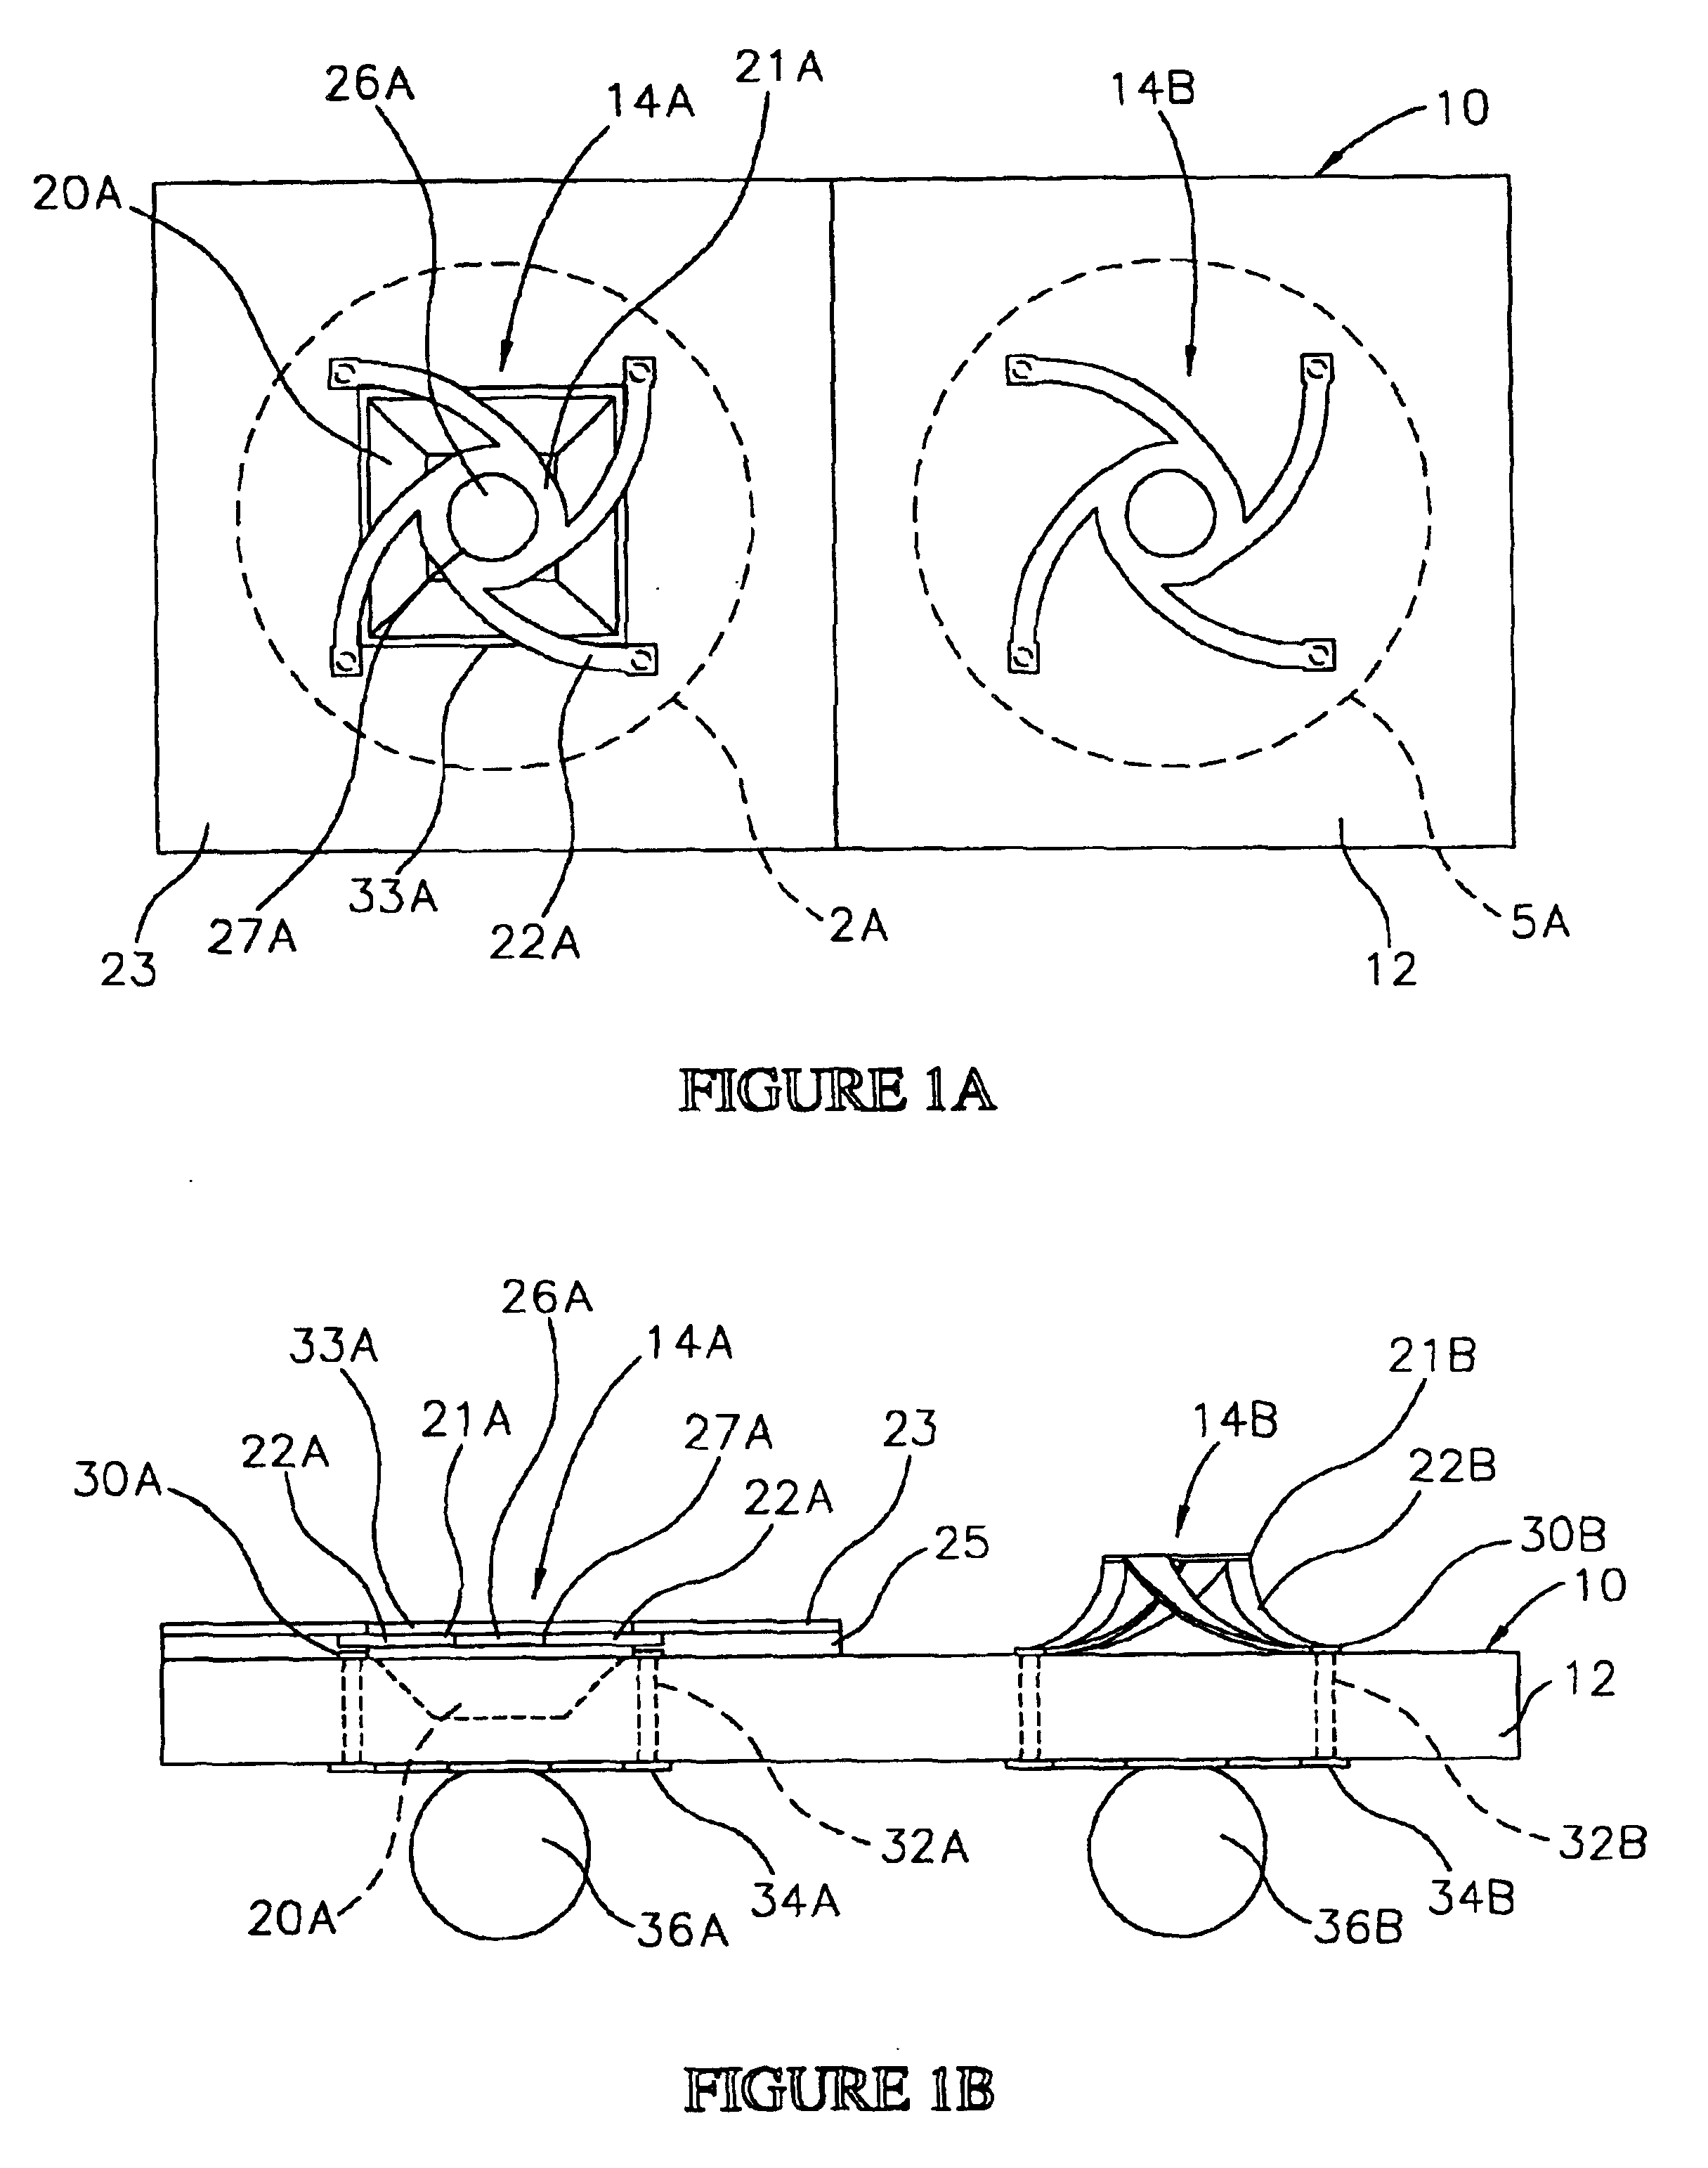 Test interconnect having suspended contacts for bumped semiconductor components